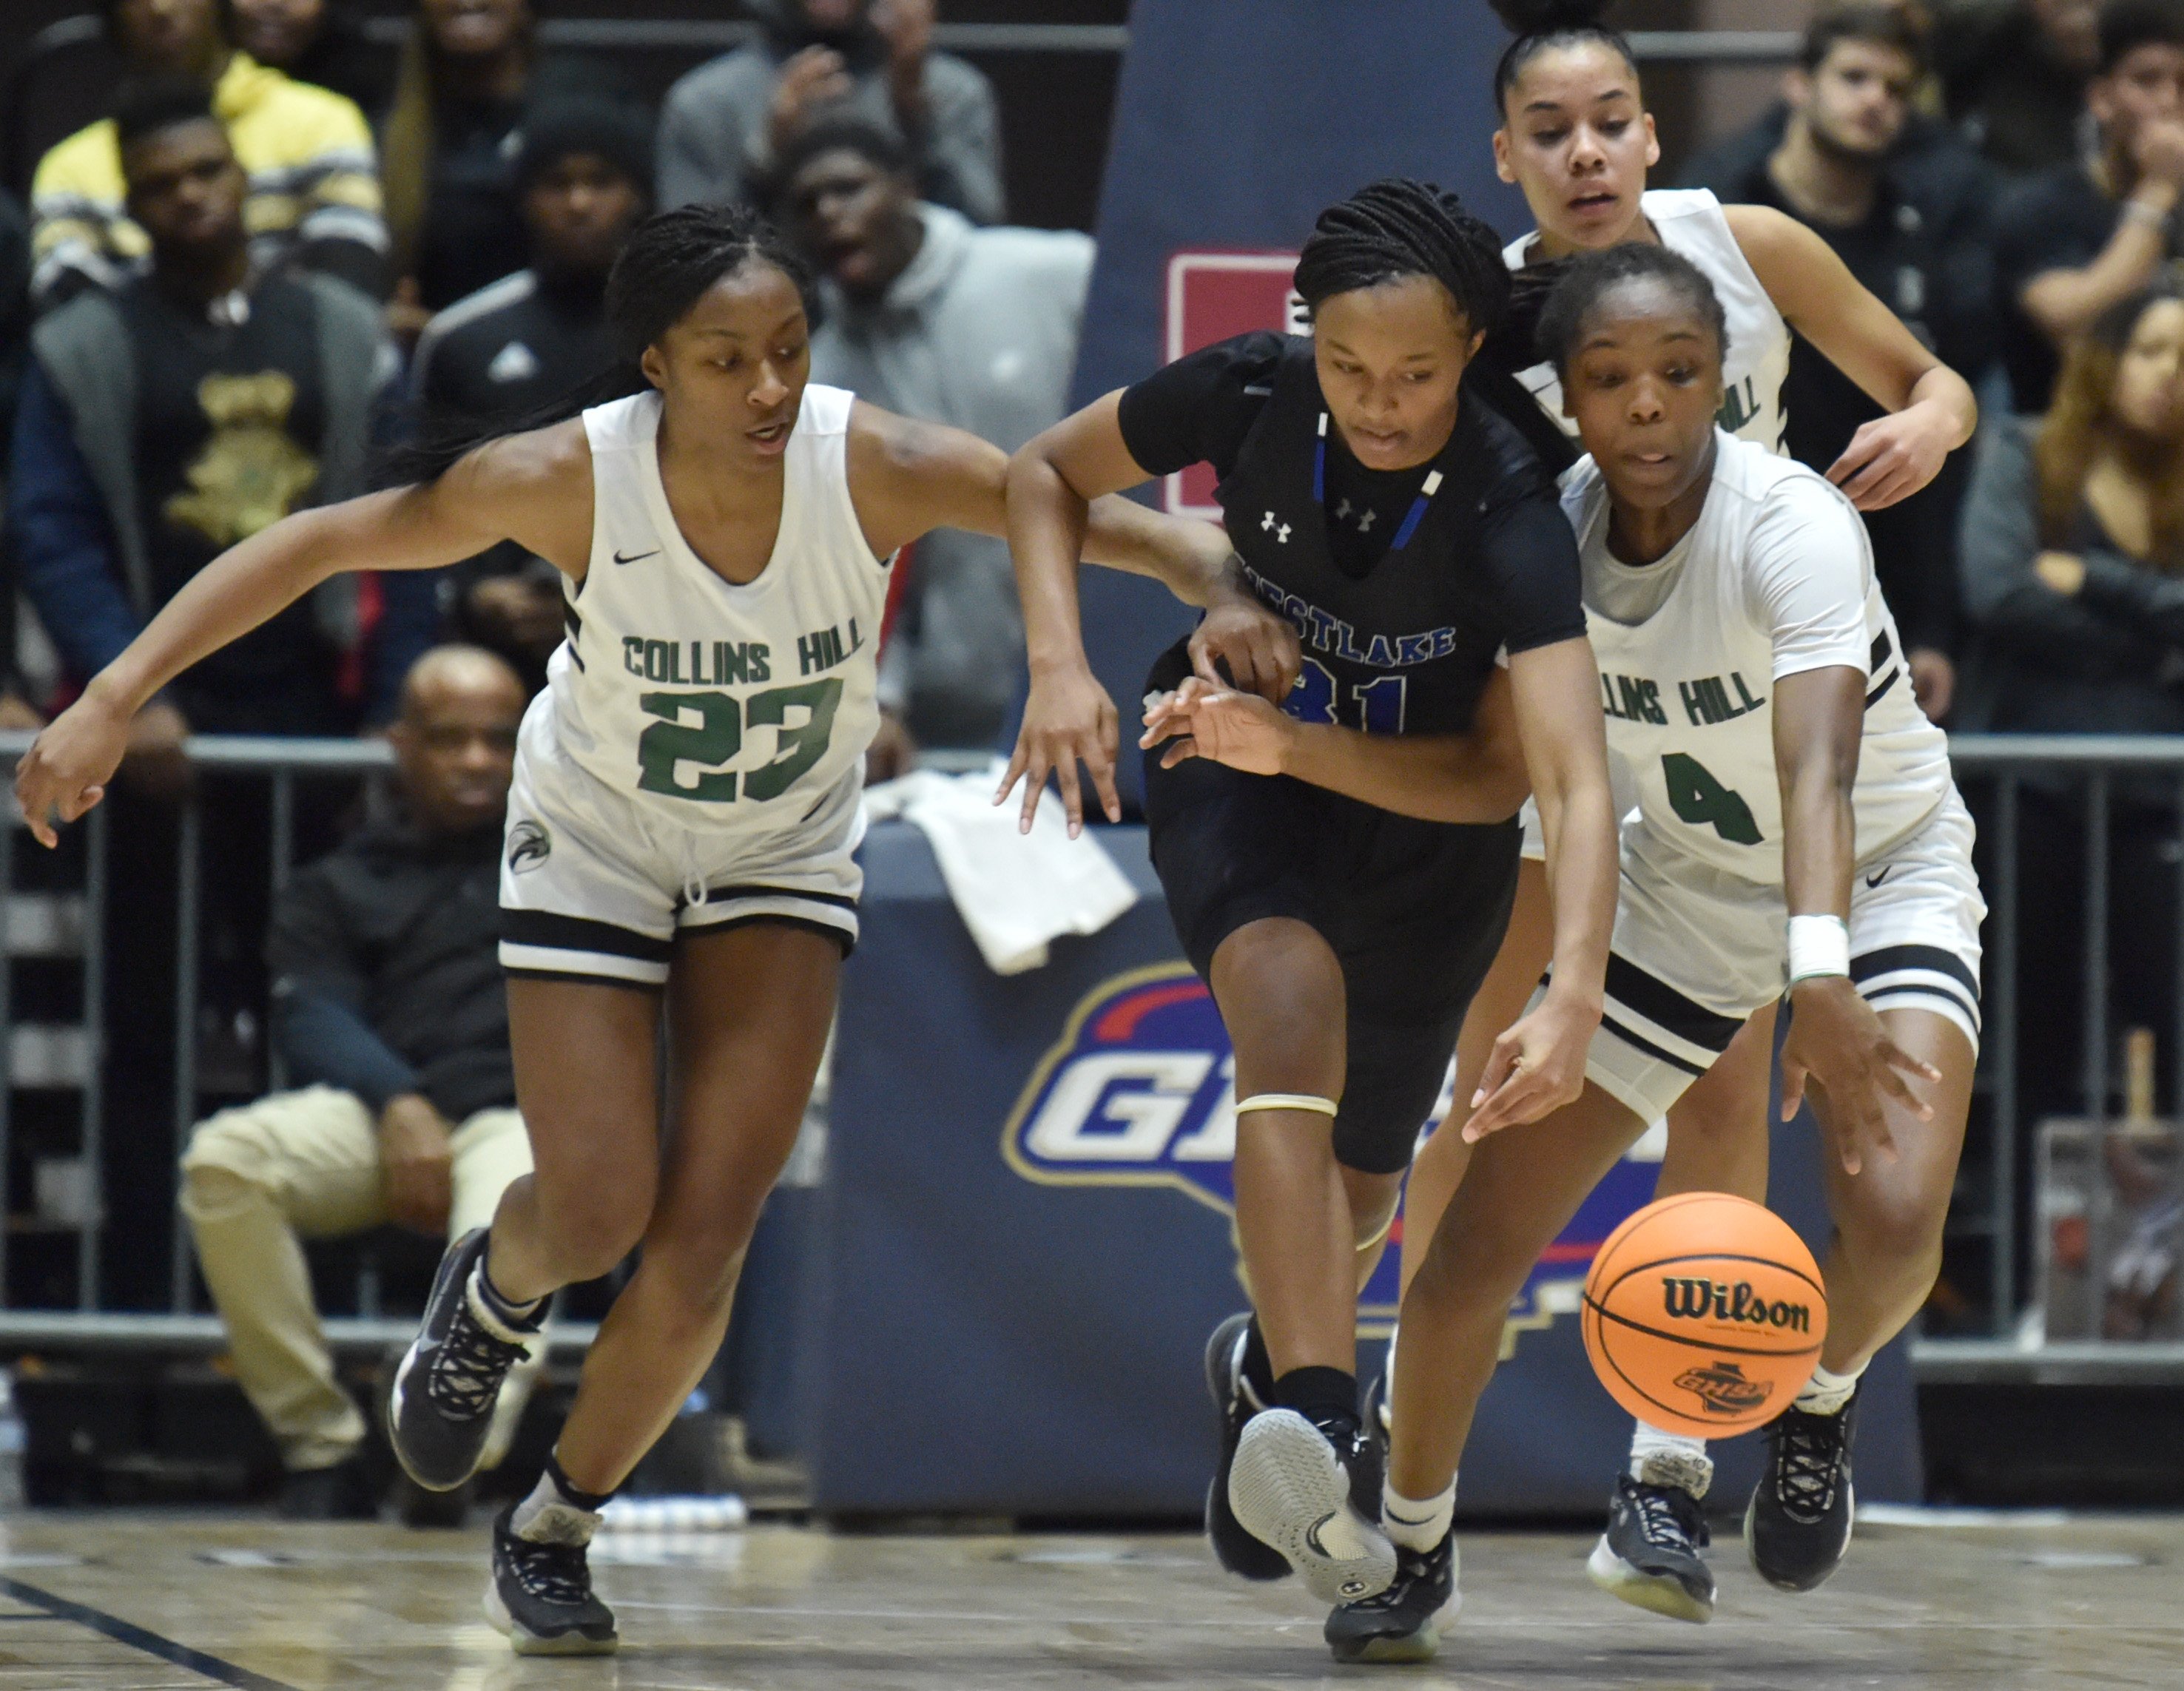 Girls Basketball Rankings Two Reigning State Champions Sit At No 1